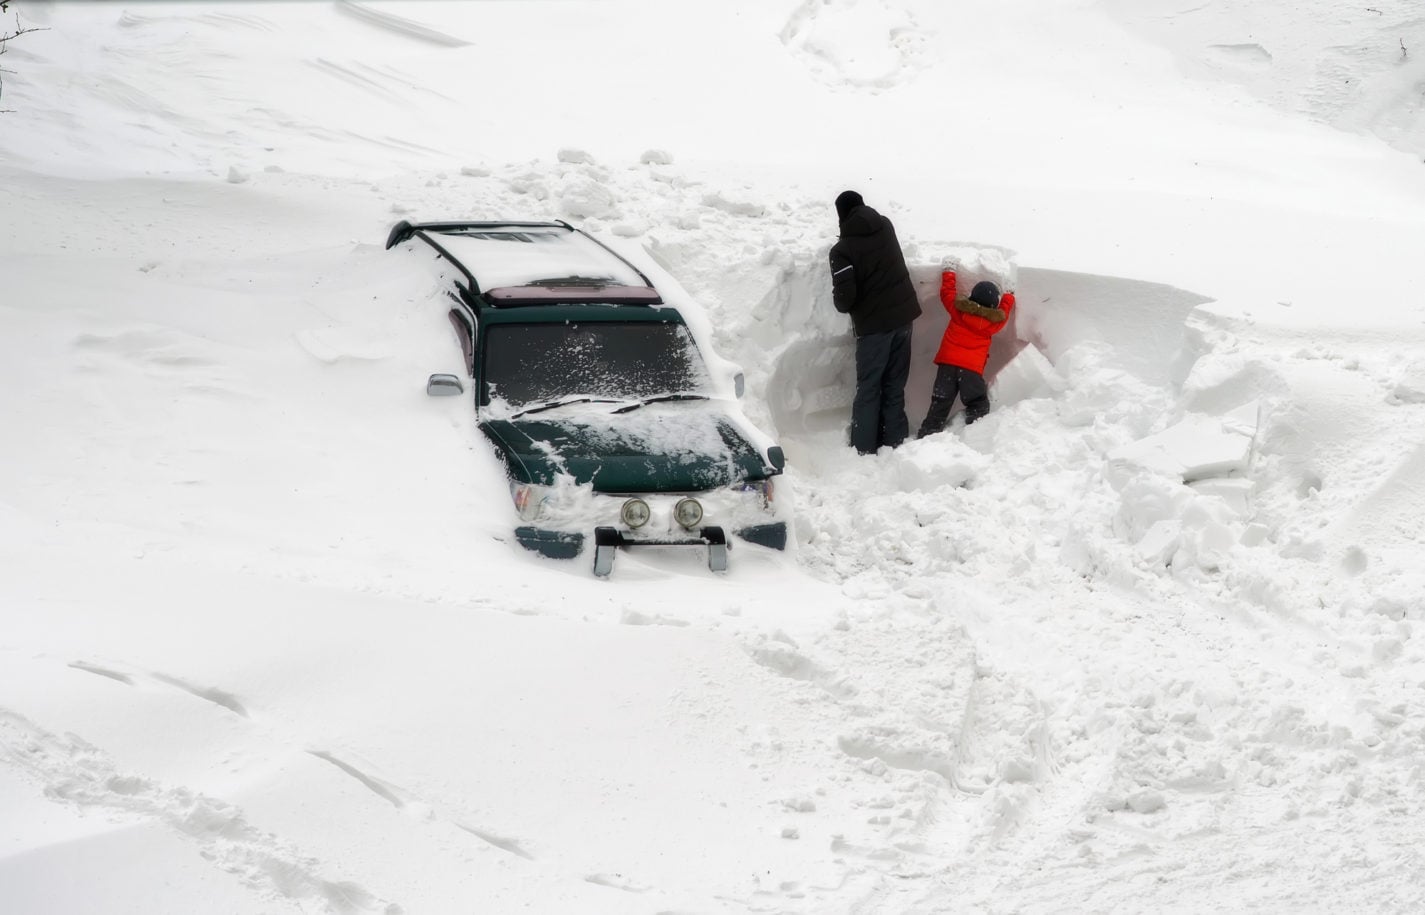 image of car hopelessly stuck in an avalanche of snow, but someone is trying to dig it out.